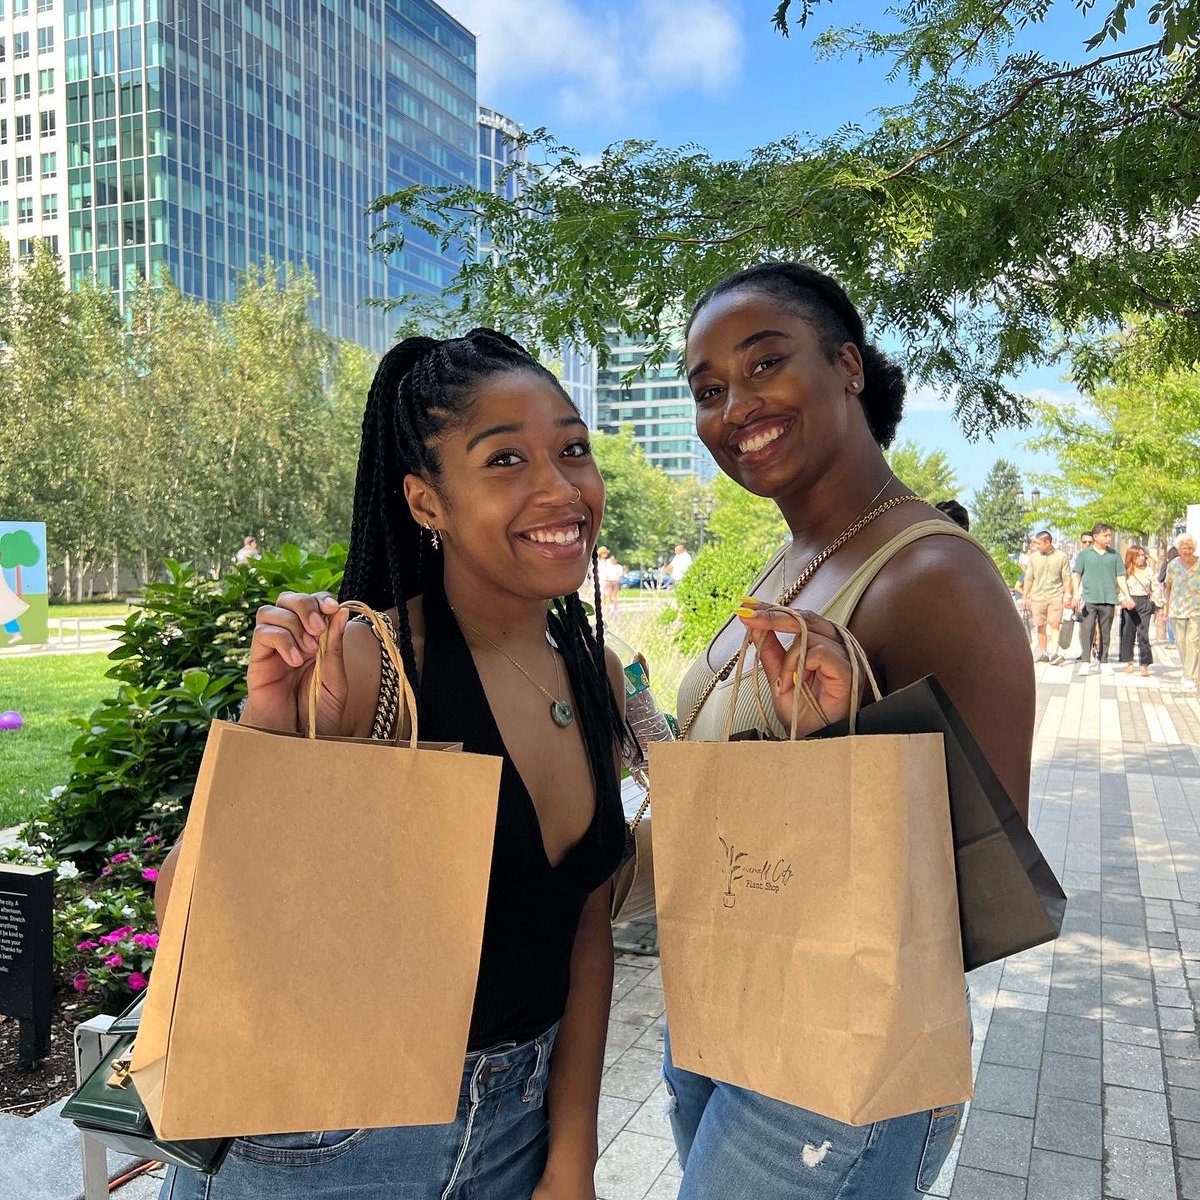 Join us on Seaport Common today 12-6pm for Day 2 of the Seaport x Black Owned Bos. Outdoor market double weekend 🛍 🎶 ☀️ 

#blackownedbos #BlackBusinessMonth #seaport